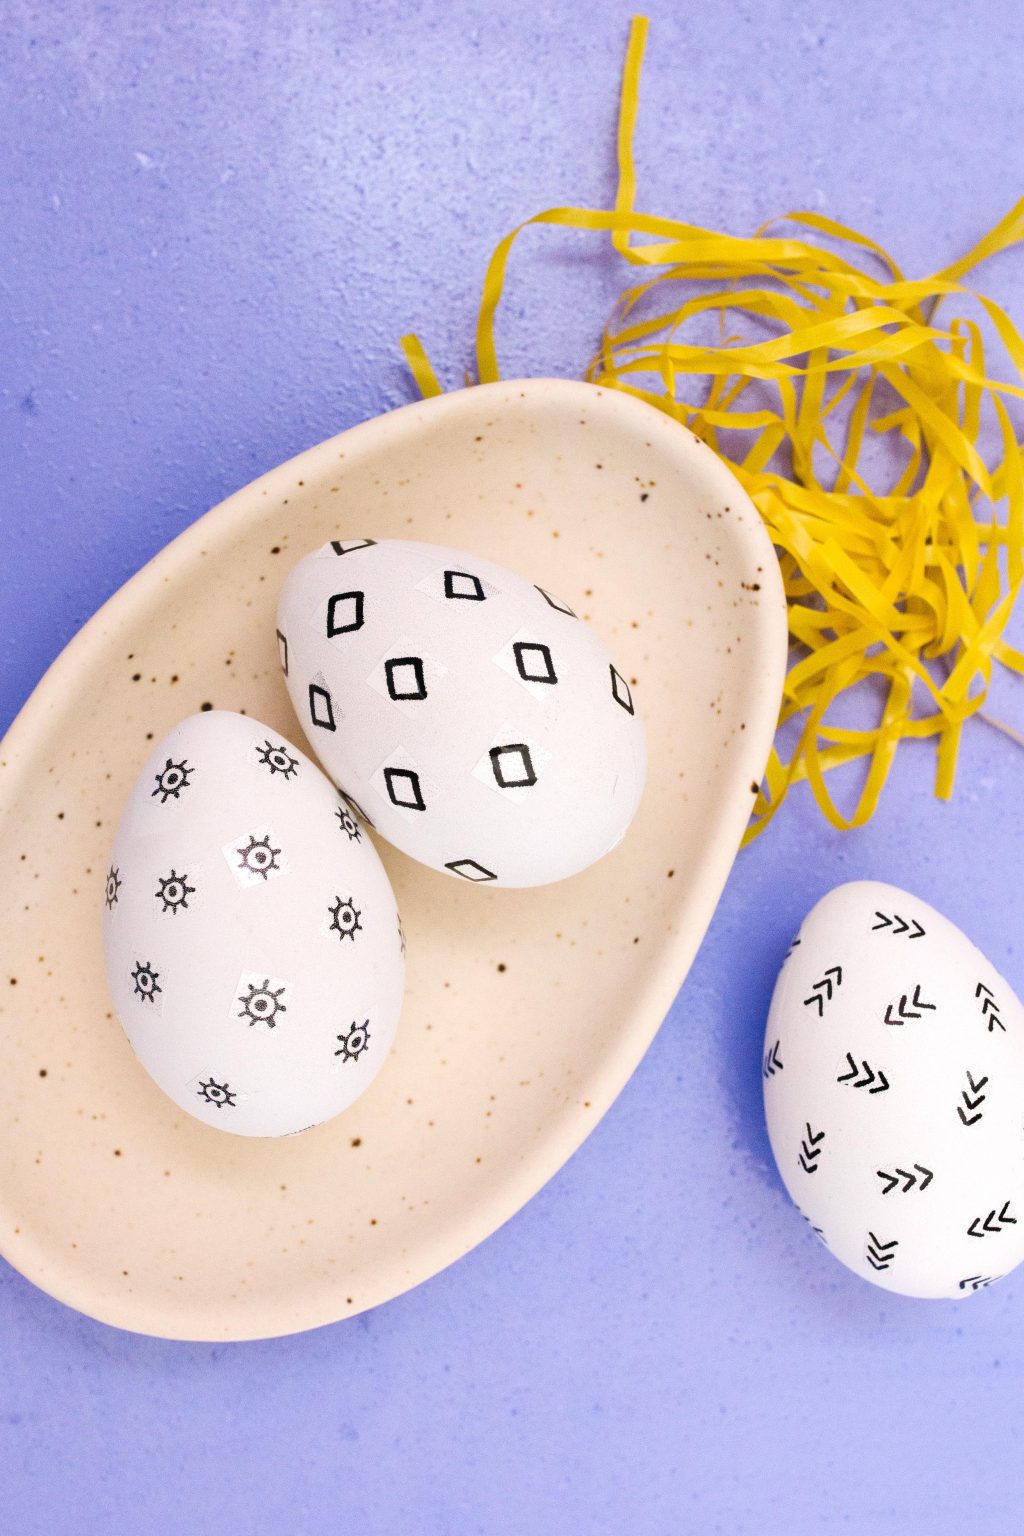 3 Creative Ways for Decorating Easter Eggs with Personalized Tape + a tutorial featured by Top US Craft Blog + The Pretty Life Girls: + Minimal Black and White